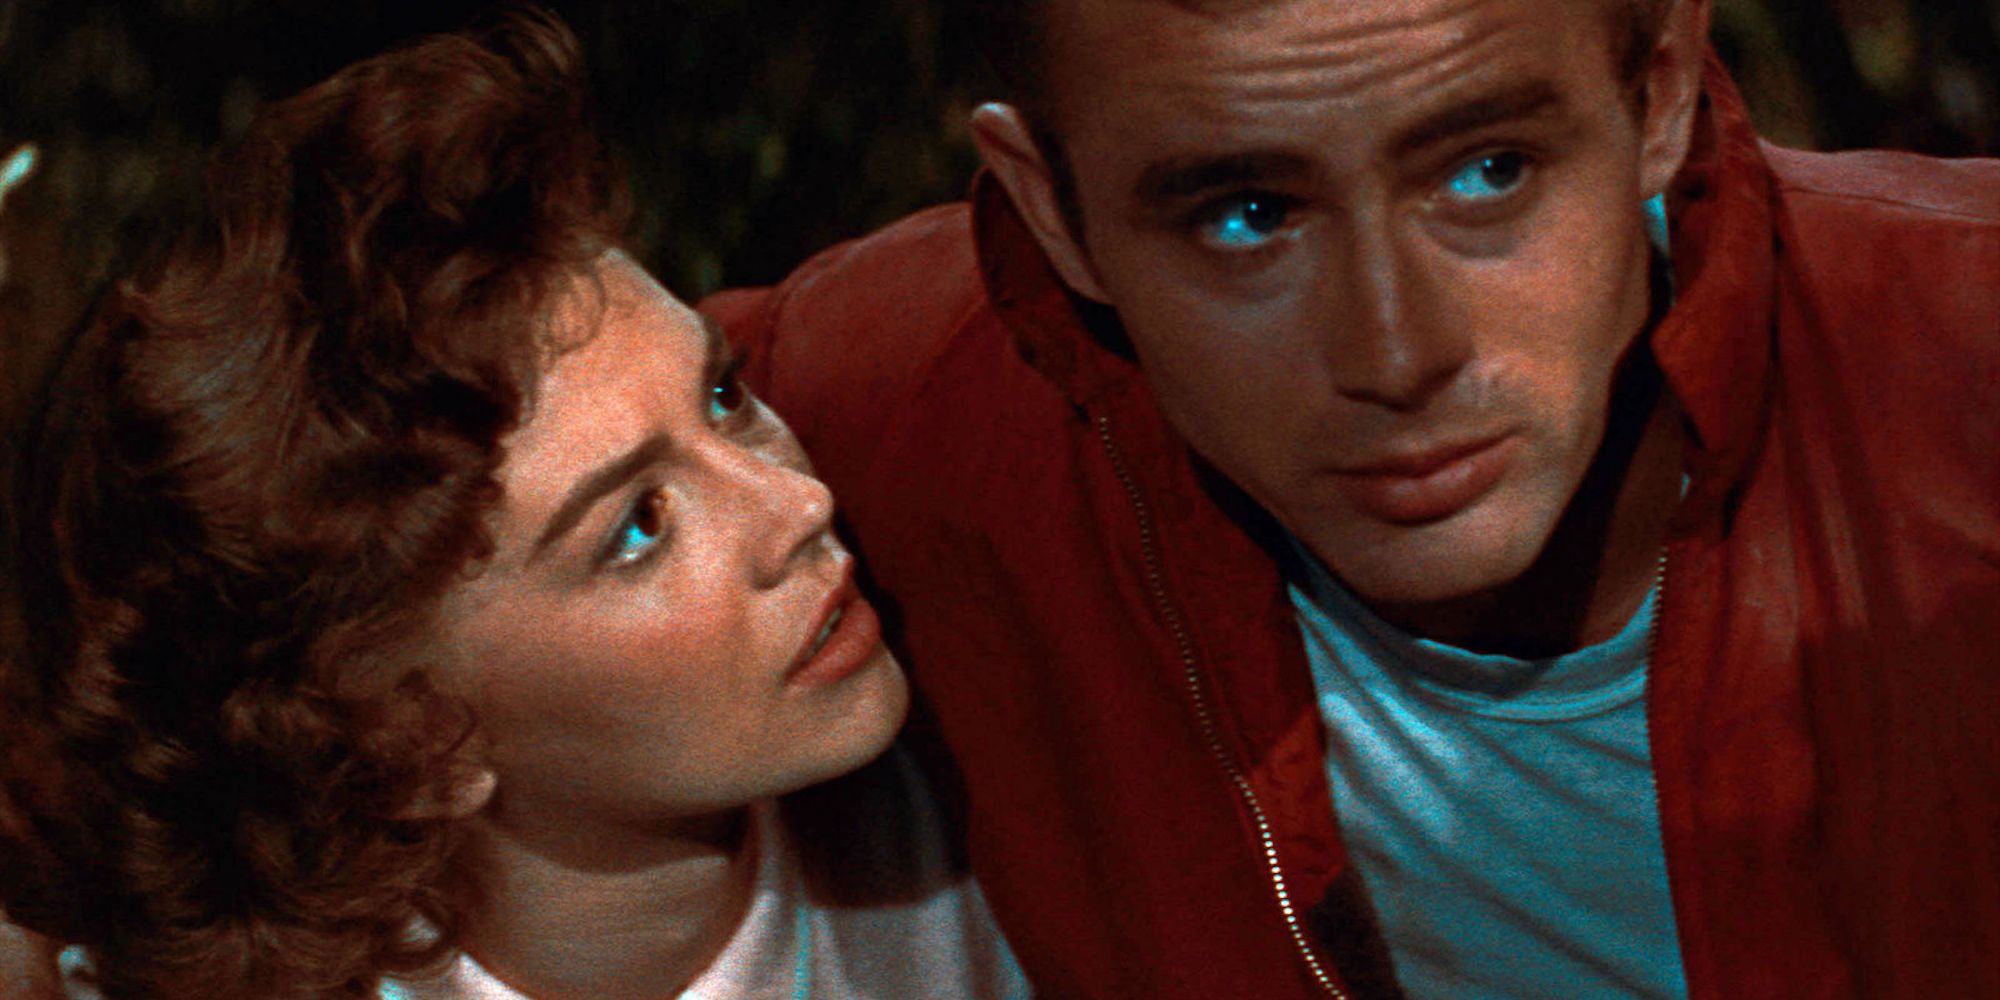 Natalie Wood as Judy looking at James Dean as Jim in Rebel Without a Cause.